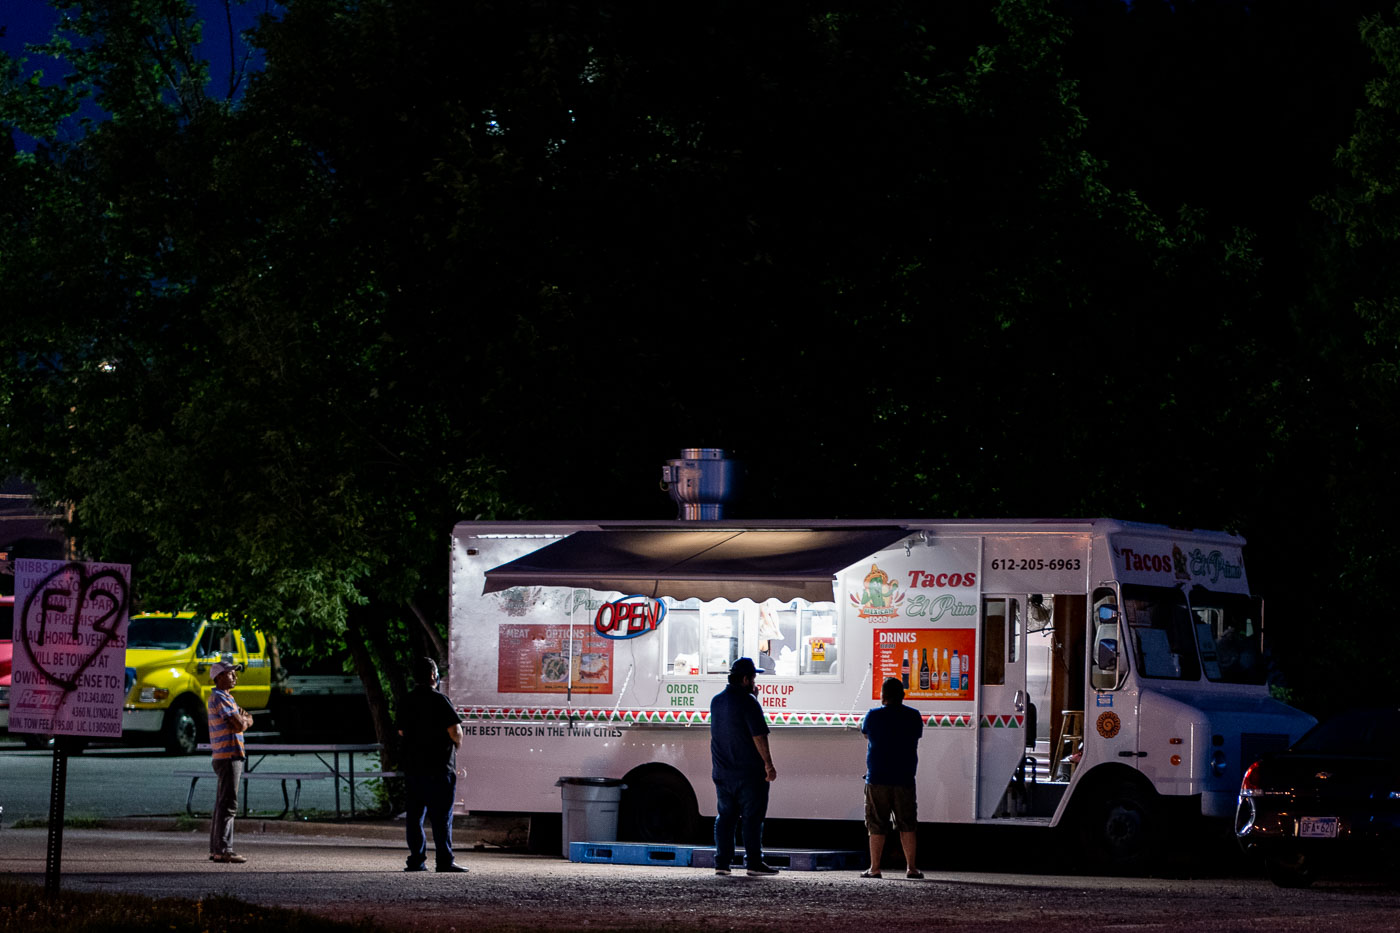 People in line at a food truck at night